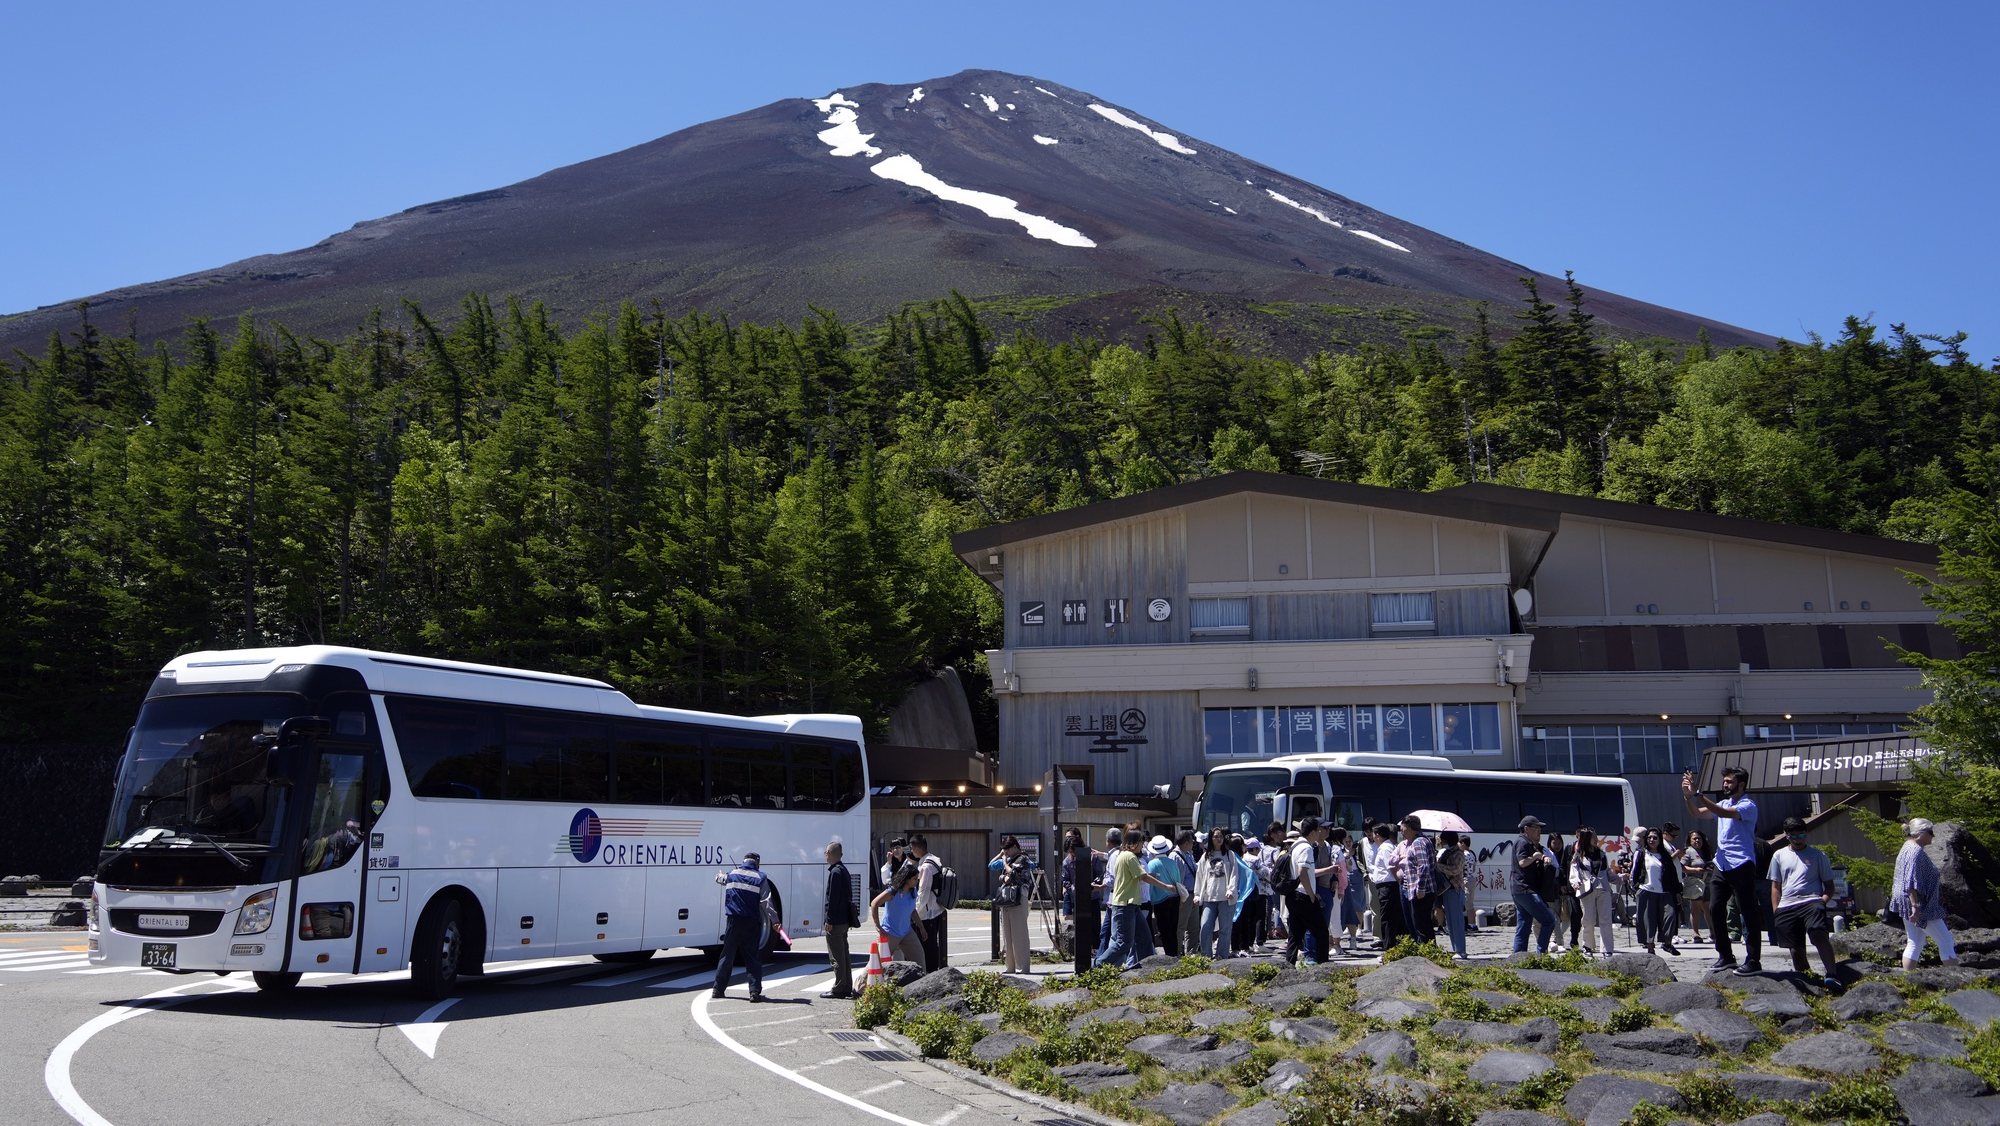 epa11421883 Tourists gather at Mount Fuji 5th station in Yamanashi prefecture, Japan, 19 June 2024. For the first time, the prefecture will start collecting a mandatory hiking fee of 2000 yen (about 12 euros) per person and an optional &#039;donation fee&#039; of 1000 yen (6 euros) per person for climbing the Mount Fuji from the 5th station. An online reservation system started operations on 20 May 2024 ahead of the opening of the Mt. Fuji Yoshida Route on 01 July 2024. Also, access to the Yoshida Route will be limited to 4000 people per day during the hiking season from 01 July until 10 September 2024. According to data released by Japan National Tourism Organization on 19 June 2024, the number of foreign visitors traveling to Japan topped the three million mark for the third month in a row, an increase of 60 percent from the same month of 2023.  EPA/FRANCK ROBICHON